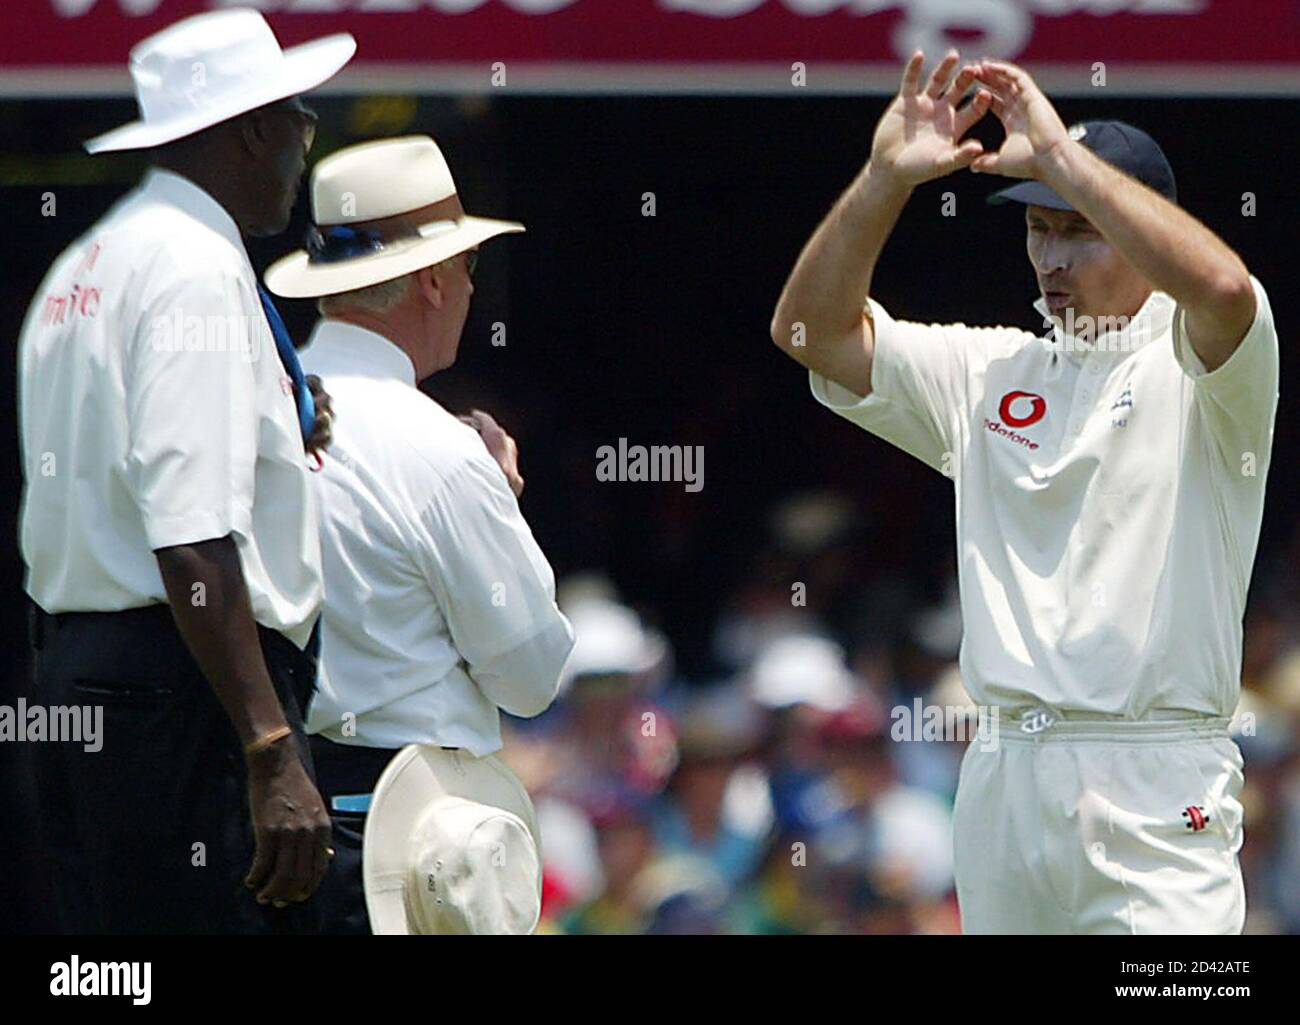 England's captain Nasser Hussain (R) argues with umpires Rudi Koetzen (C) and Steve Bucknor (L) after Australia's Mathew Hayden was caught by Simon Jones but fell out of the field of play during the first day's play in the first Ashes test match at the Gabba in Brisbane November 7, 2002. Australia have held the Ashes for the last six series. REUTERS/David Gray  DG/DL Stock Photo